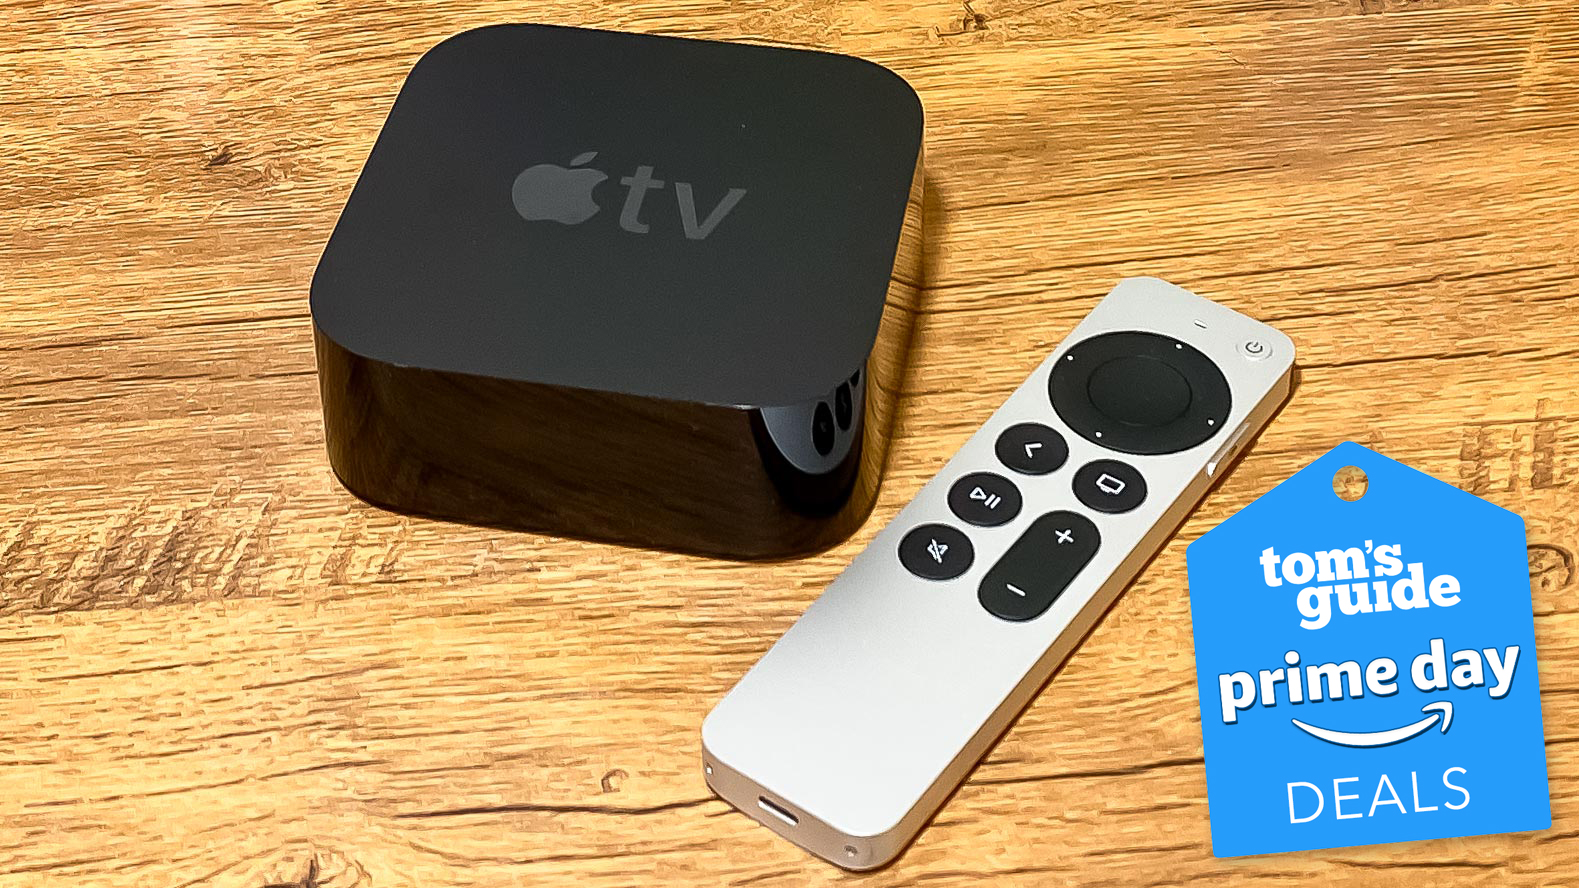 The Apple TV 4K (2021) and the new Siri remote with a Tom's Guide Prime Day image.